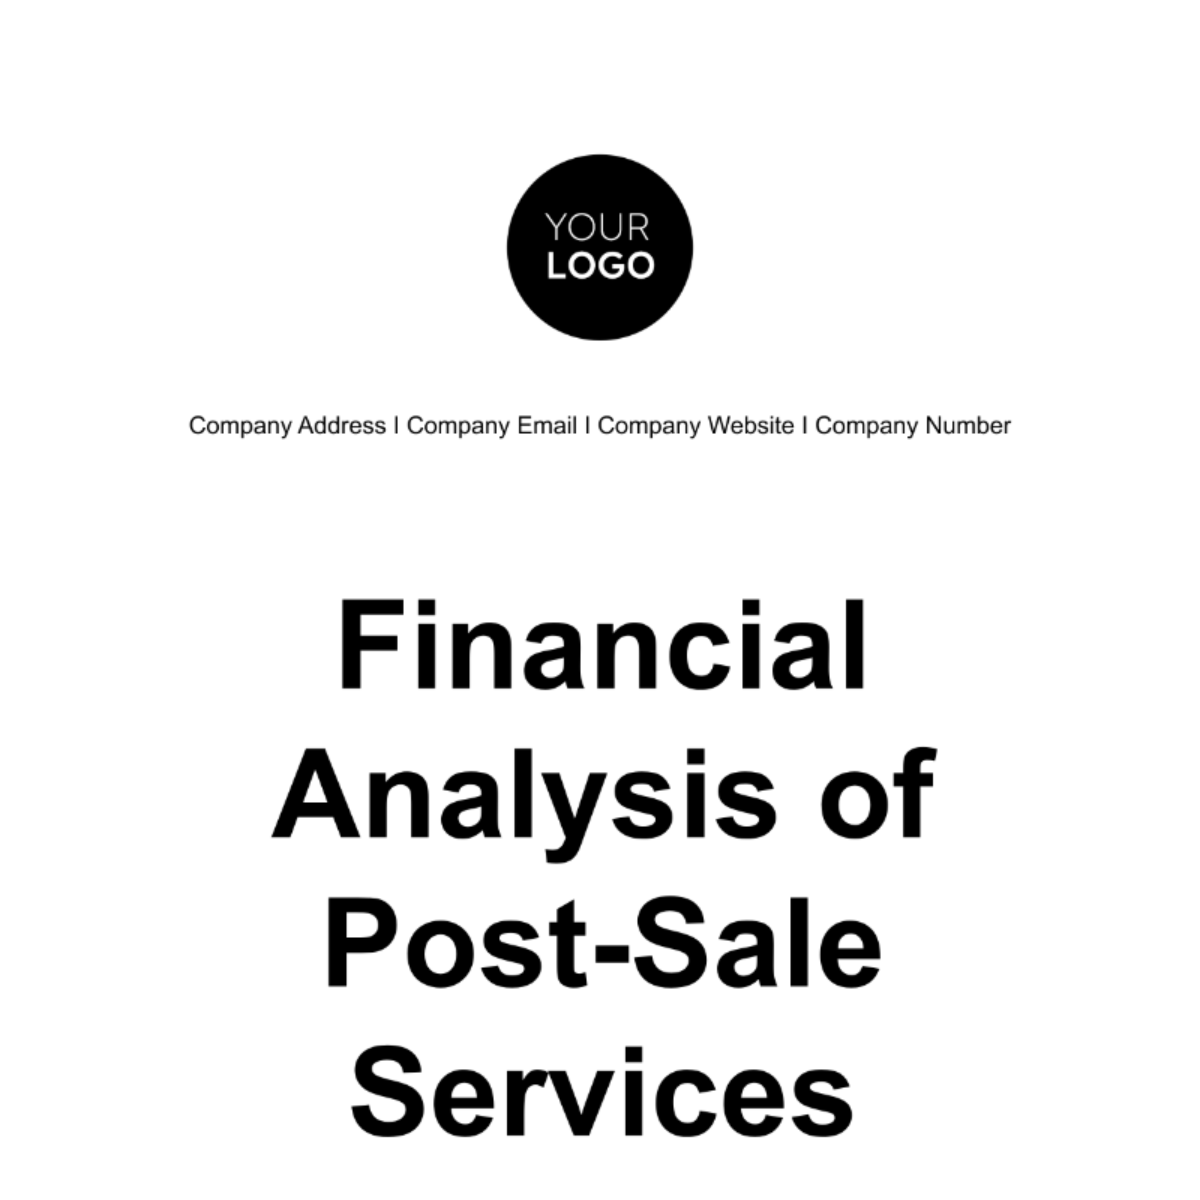 Financial Analysis of Post-Sale Services Template